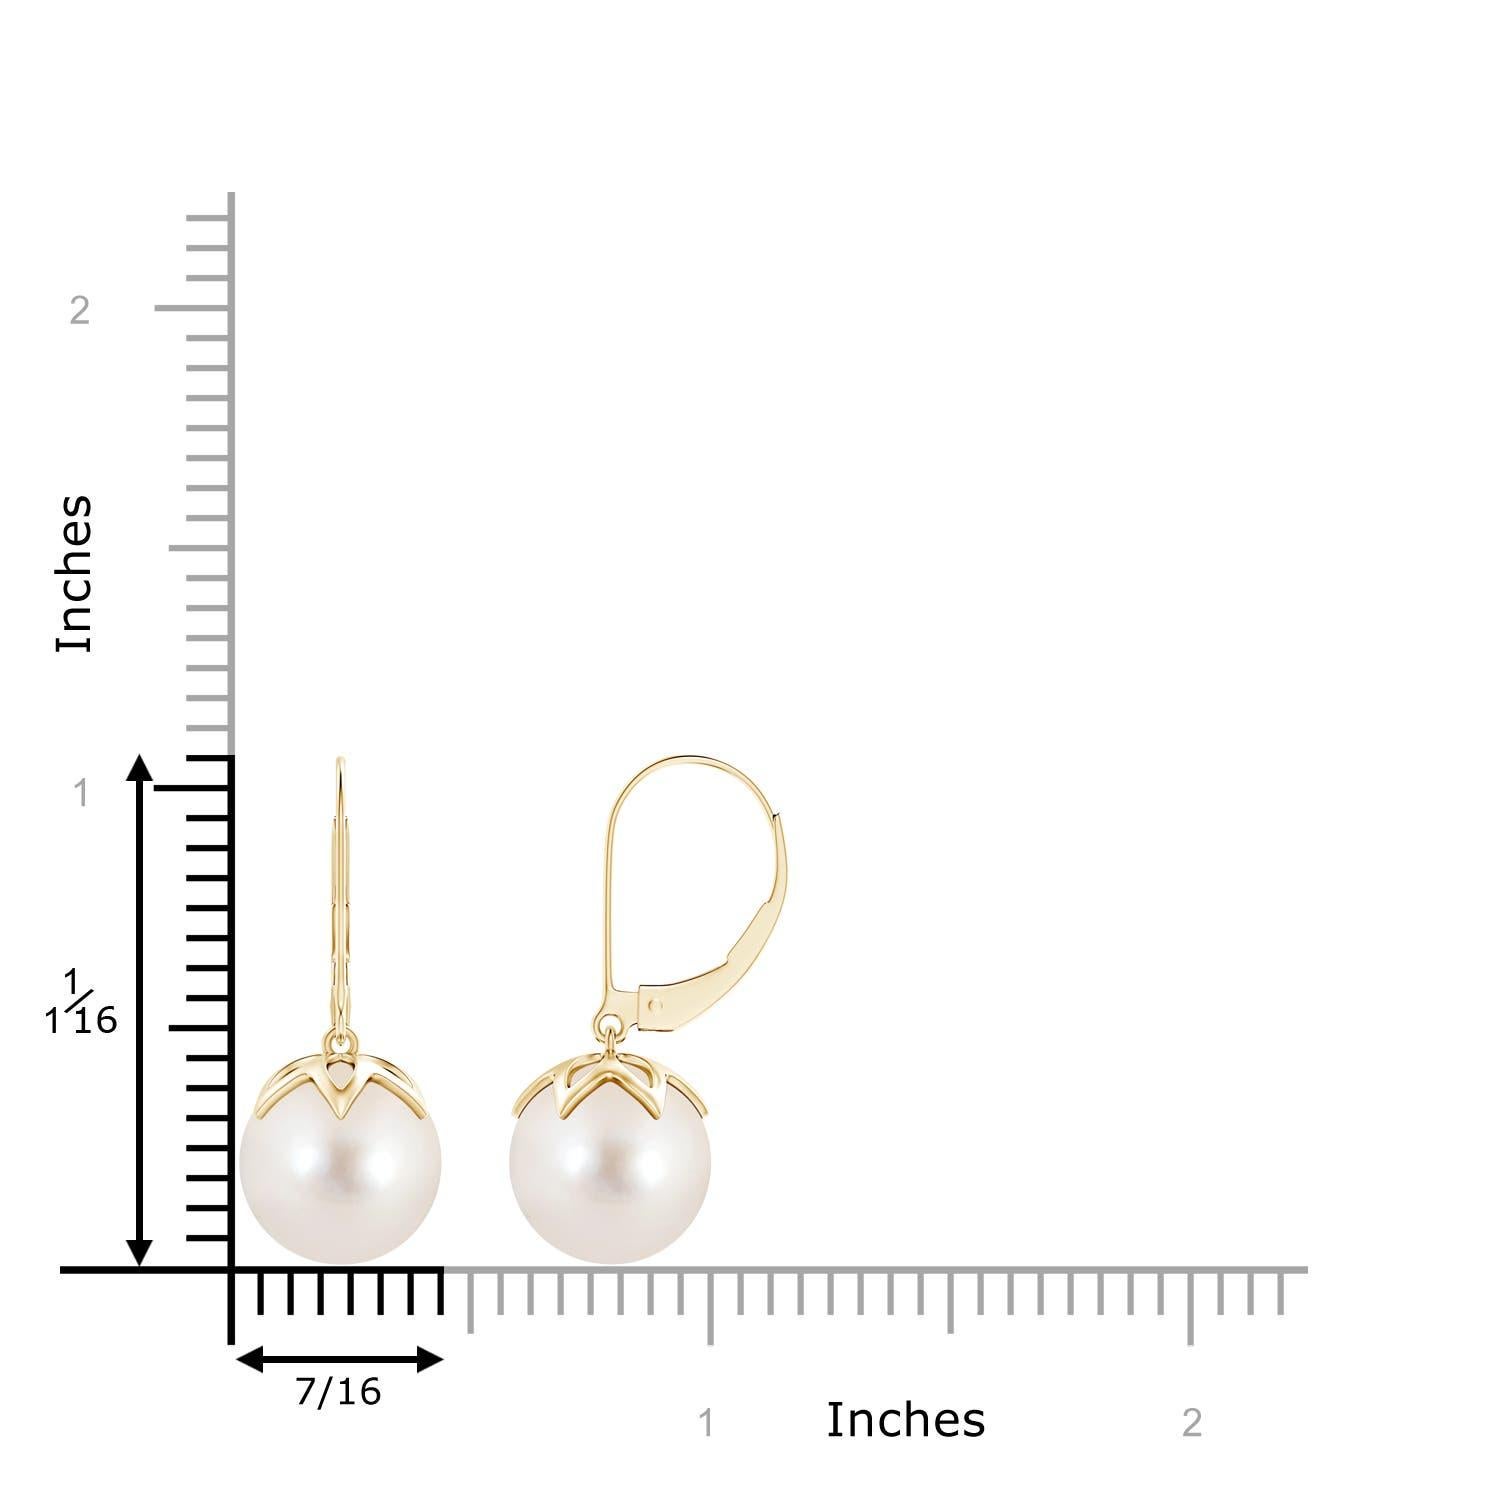 The classic white of the two round peg-set Freshwater cultured pearls is sure to allure. Crafted in 14K yellow gold, these dangling pearl earrings will give you a polished look for the day as well as the night. Match these pearl ball drop earrings